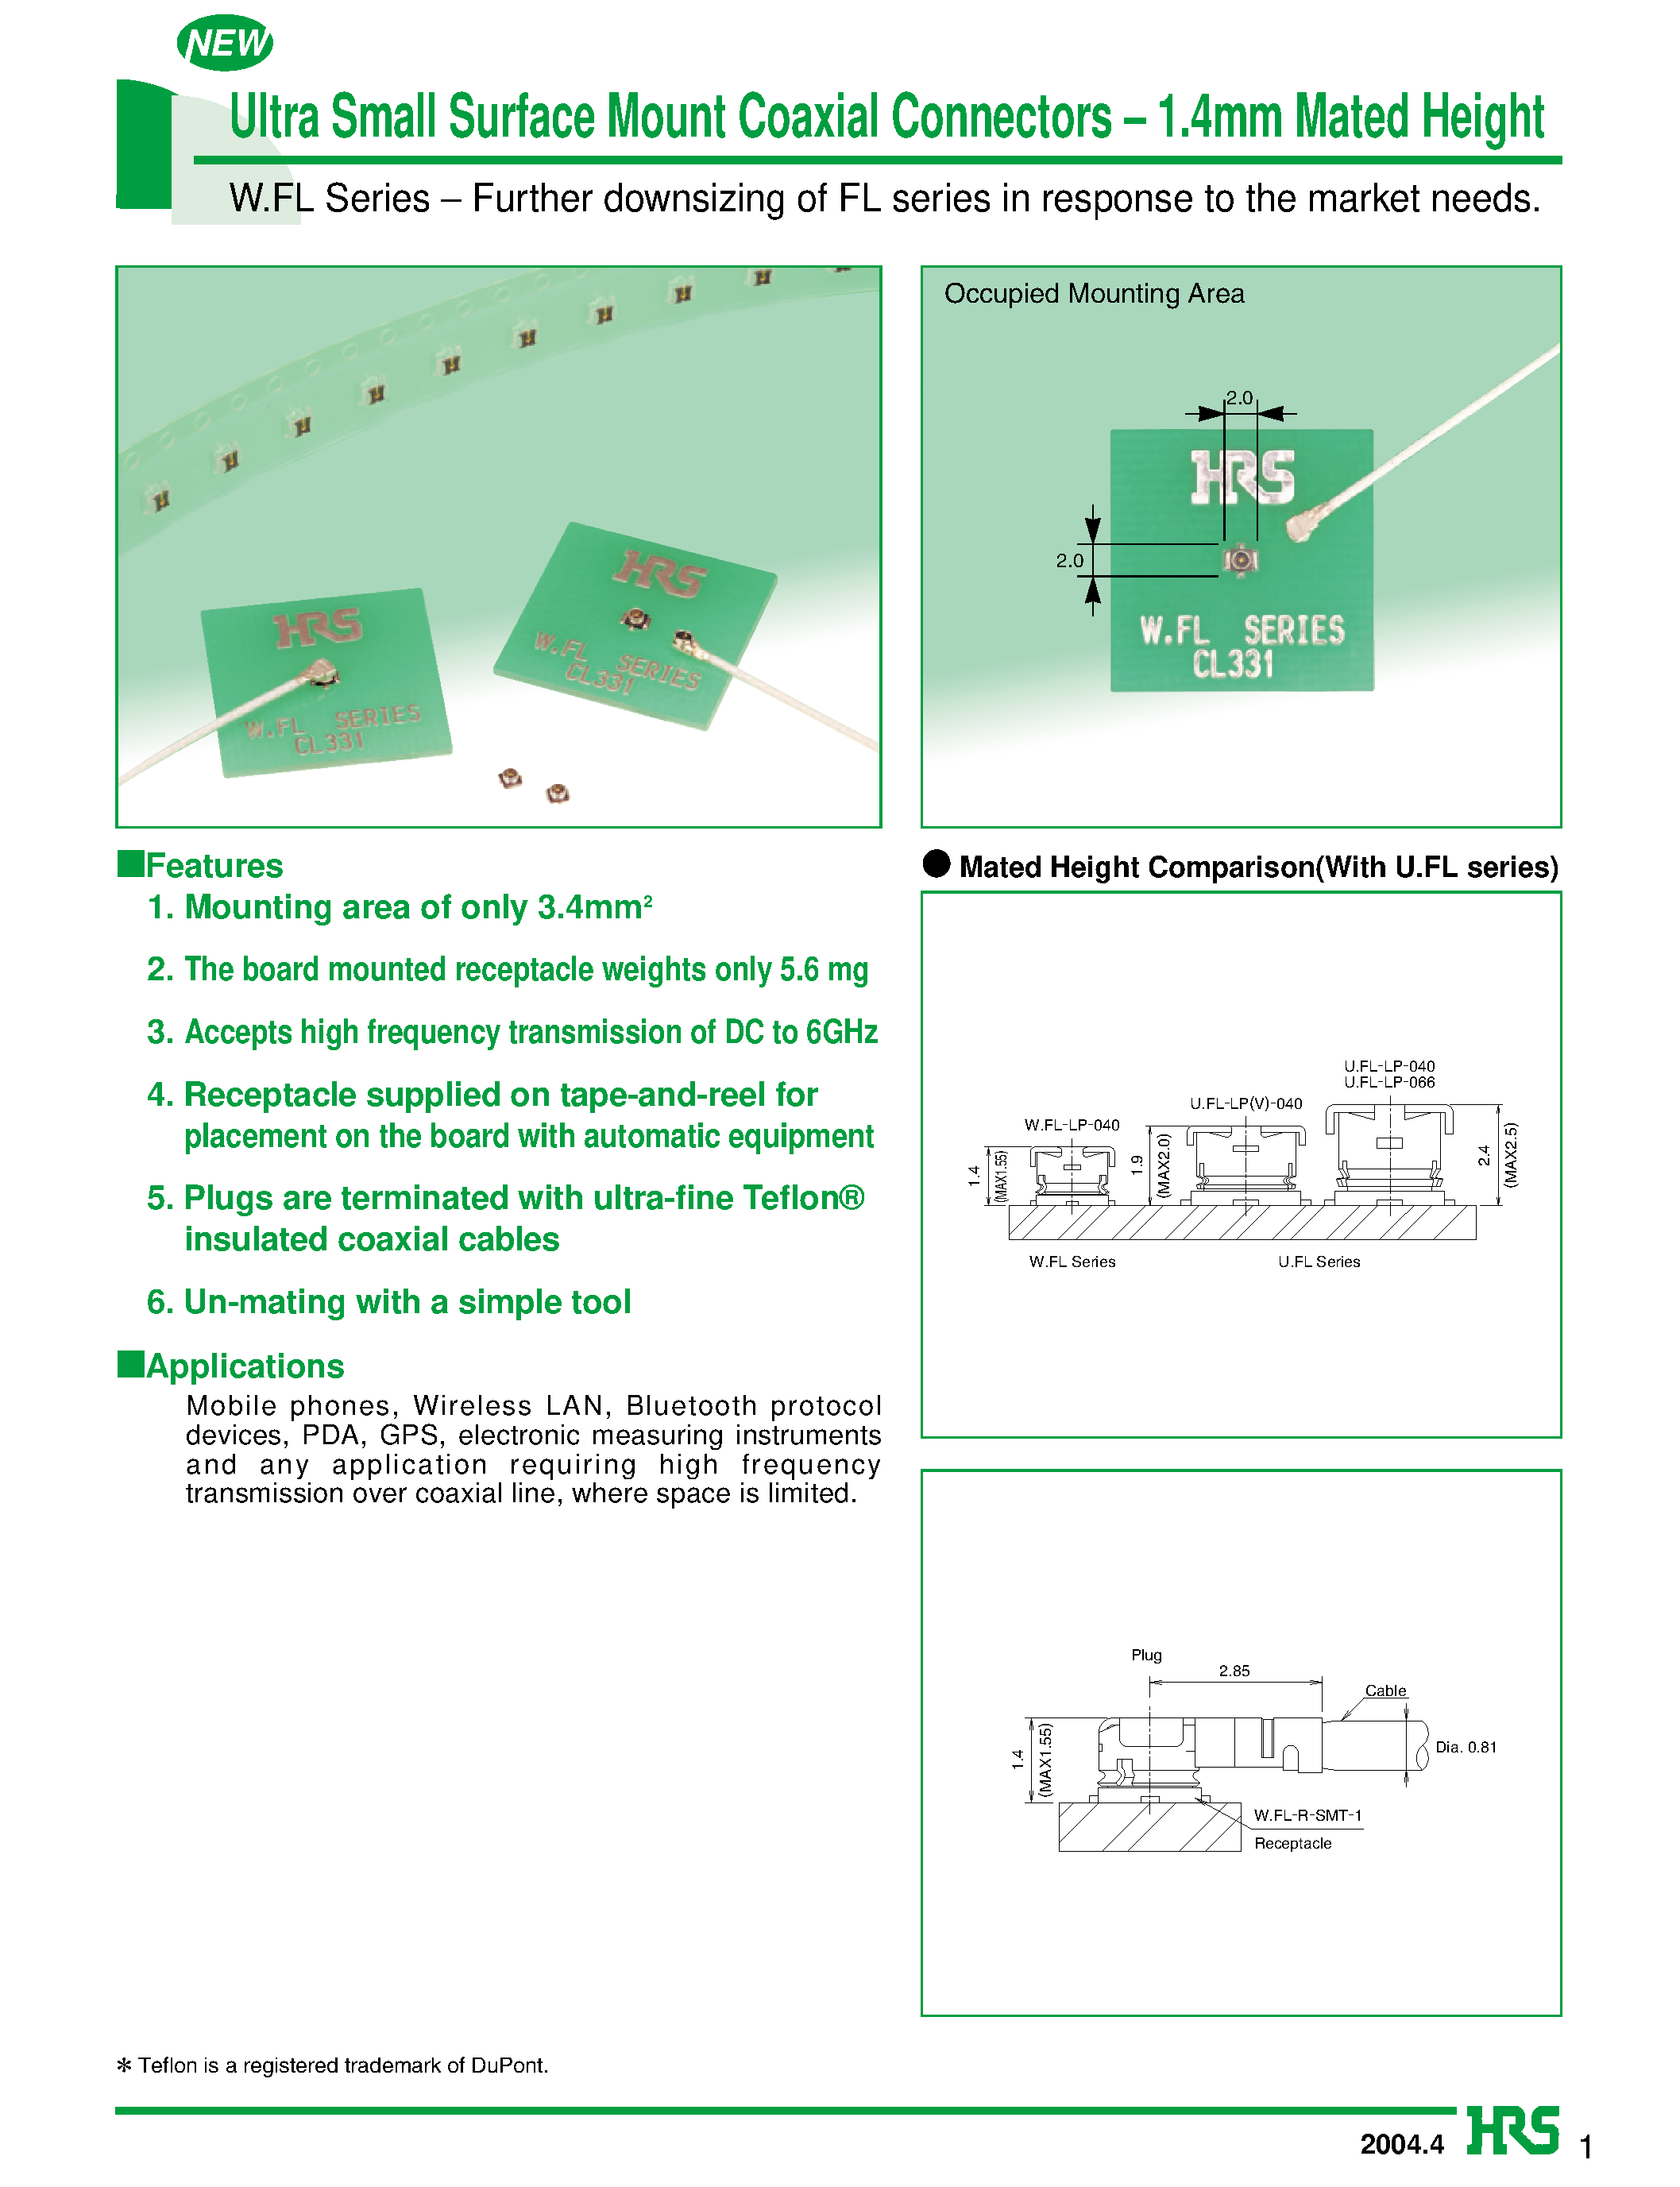 Datasheet W.FL-R-SMT-1 - Ultra Small Surface Mount Coaxial Connectors - 1.4mm Mated Height page 1